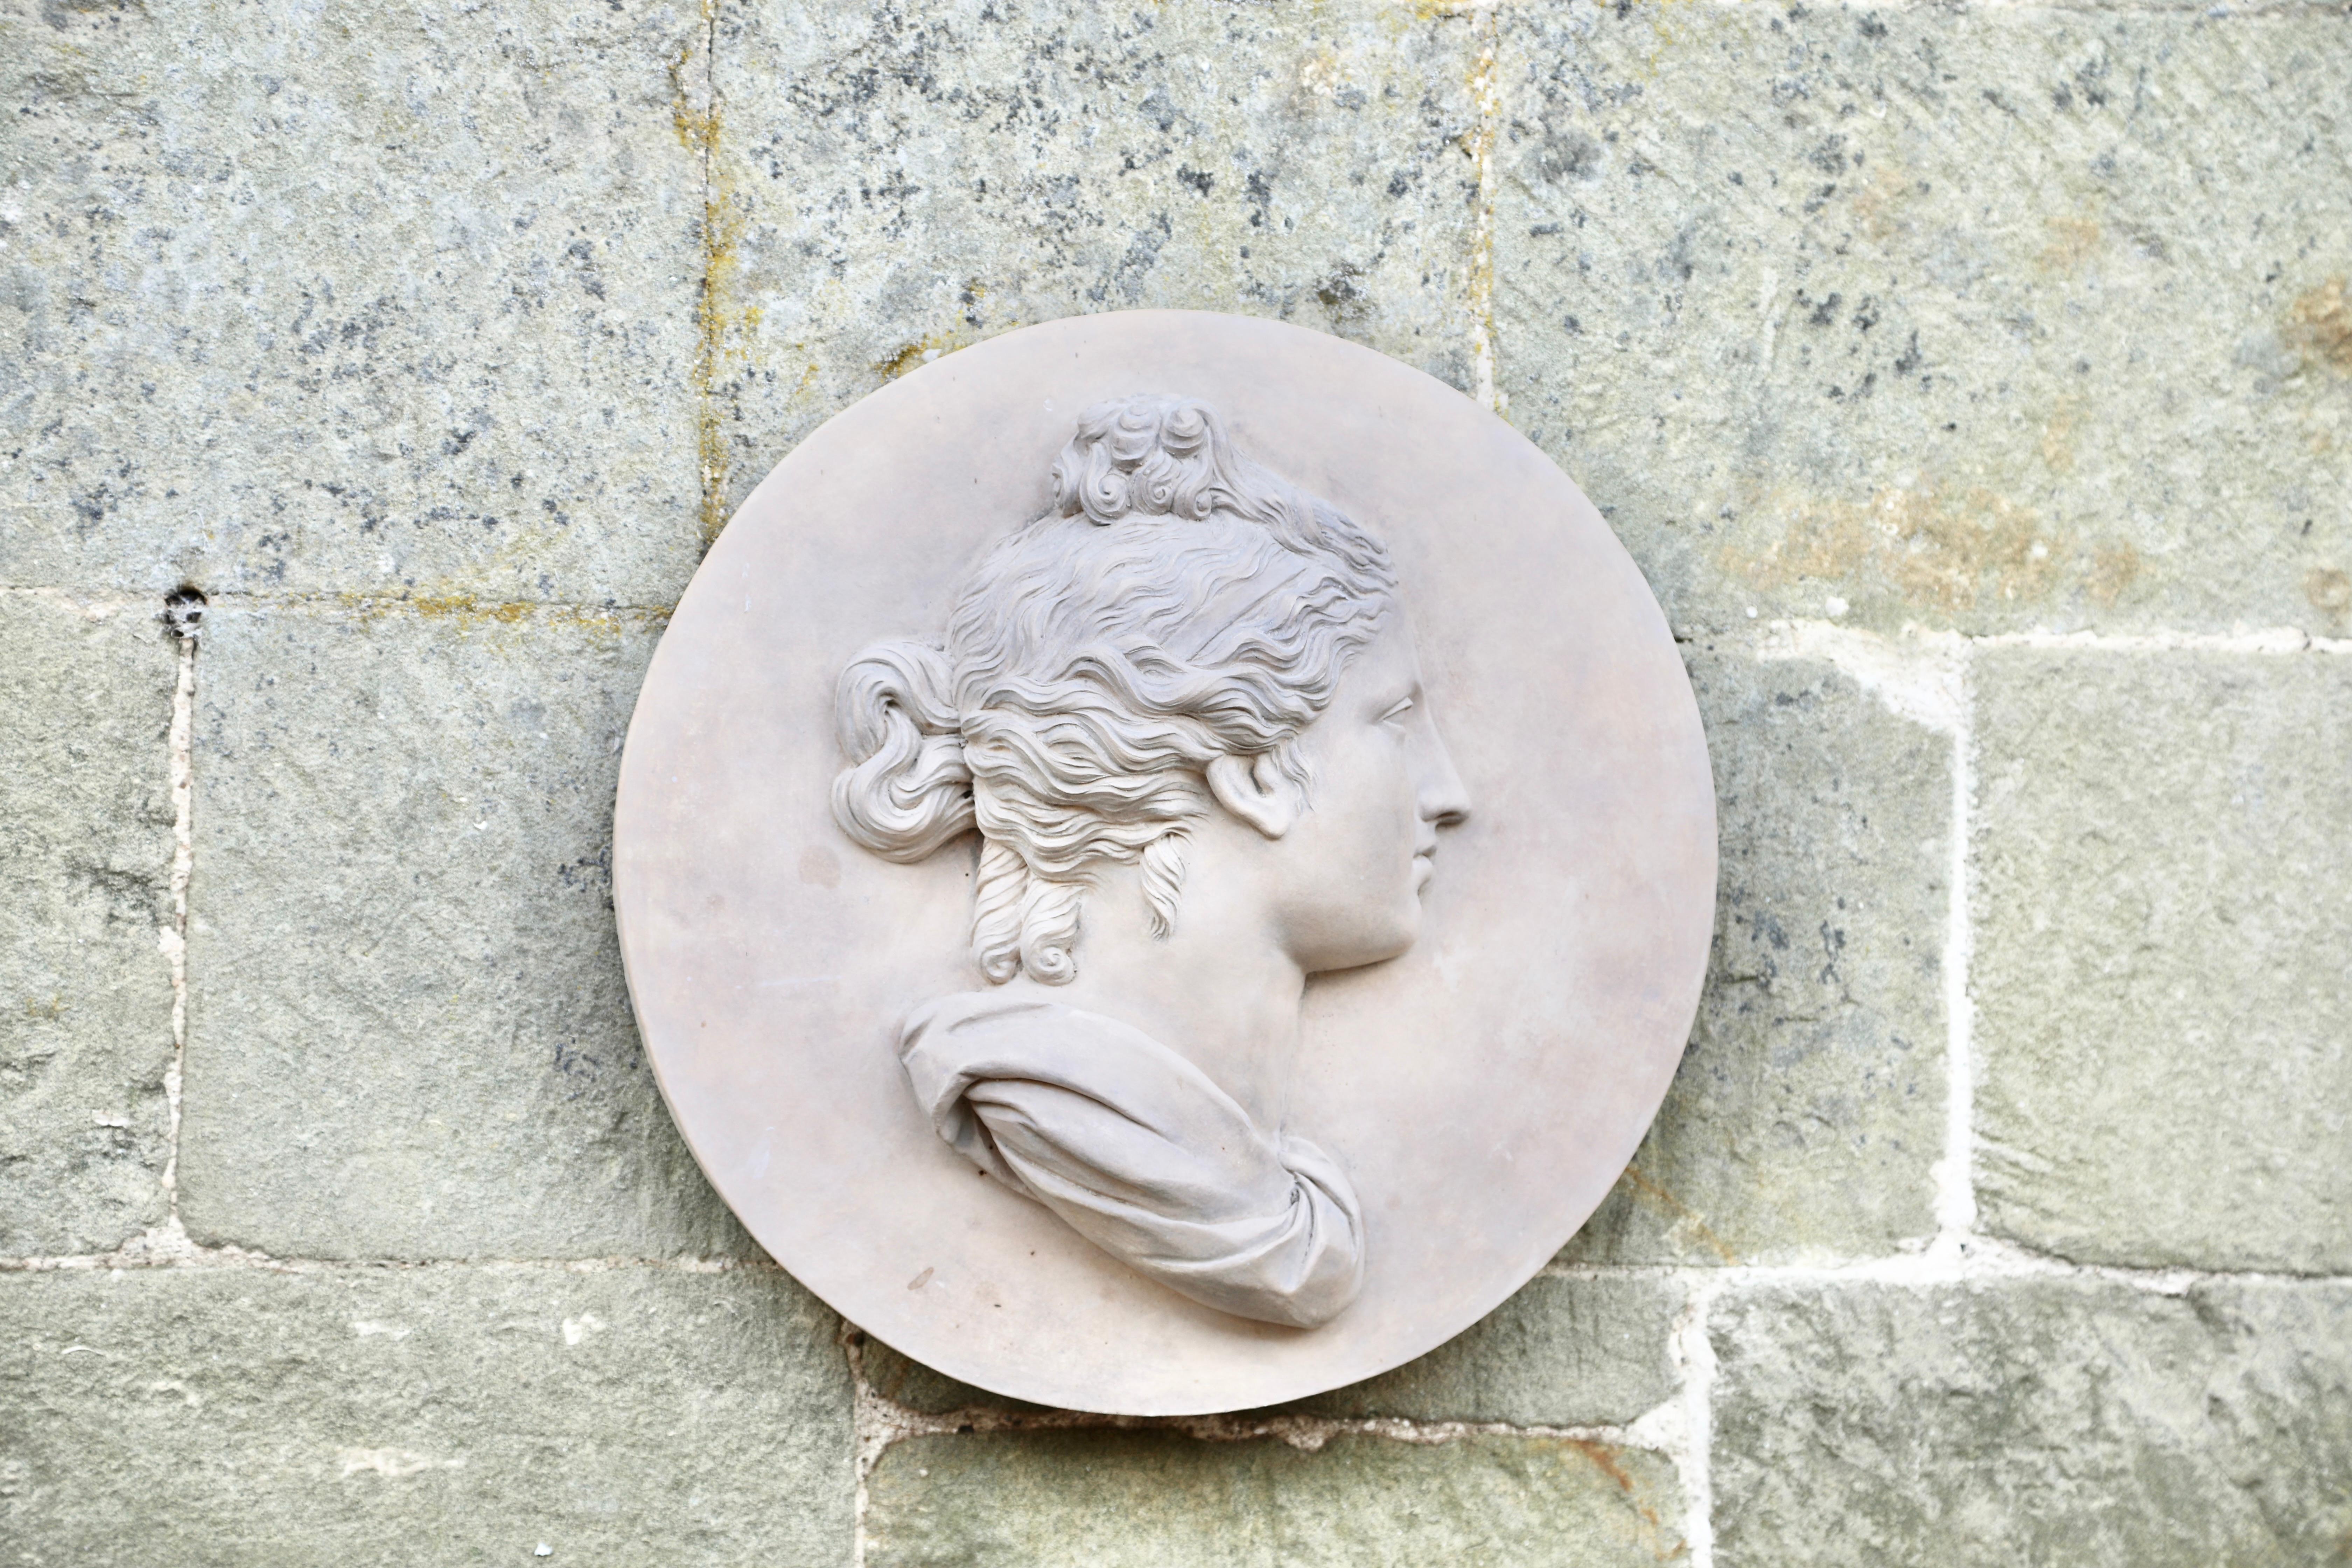 The roundel is crafted from Ceramic Stoneware and is a modern rendition of an 18th-century Coade original, showcasing a neoclassical style. It draws inspiration from classical antique bust models found in Ancient Greece, Rome, and Renaissance